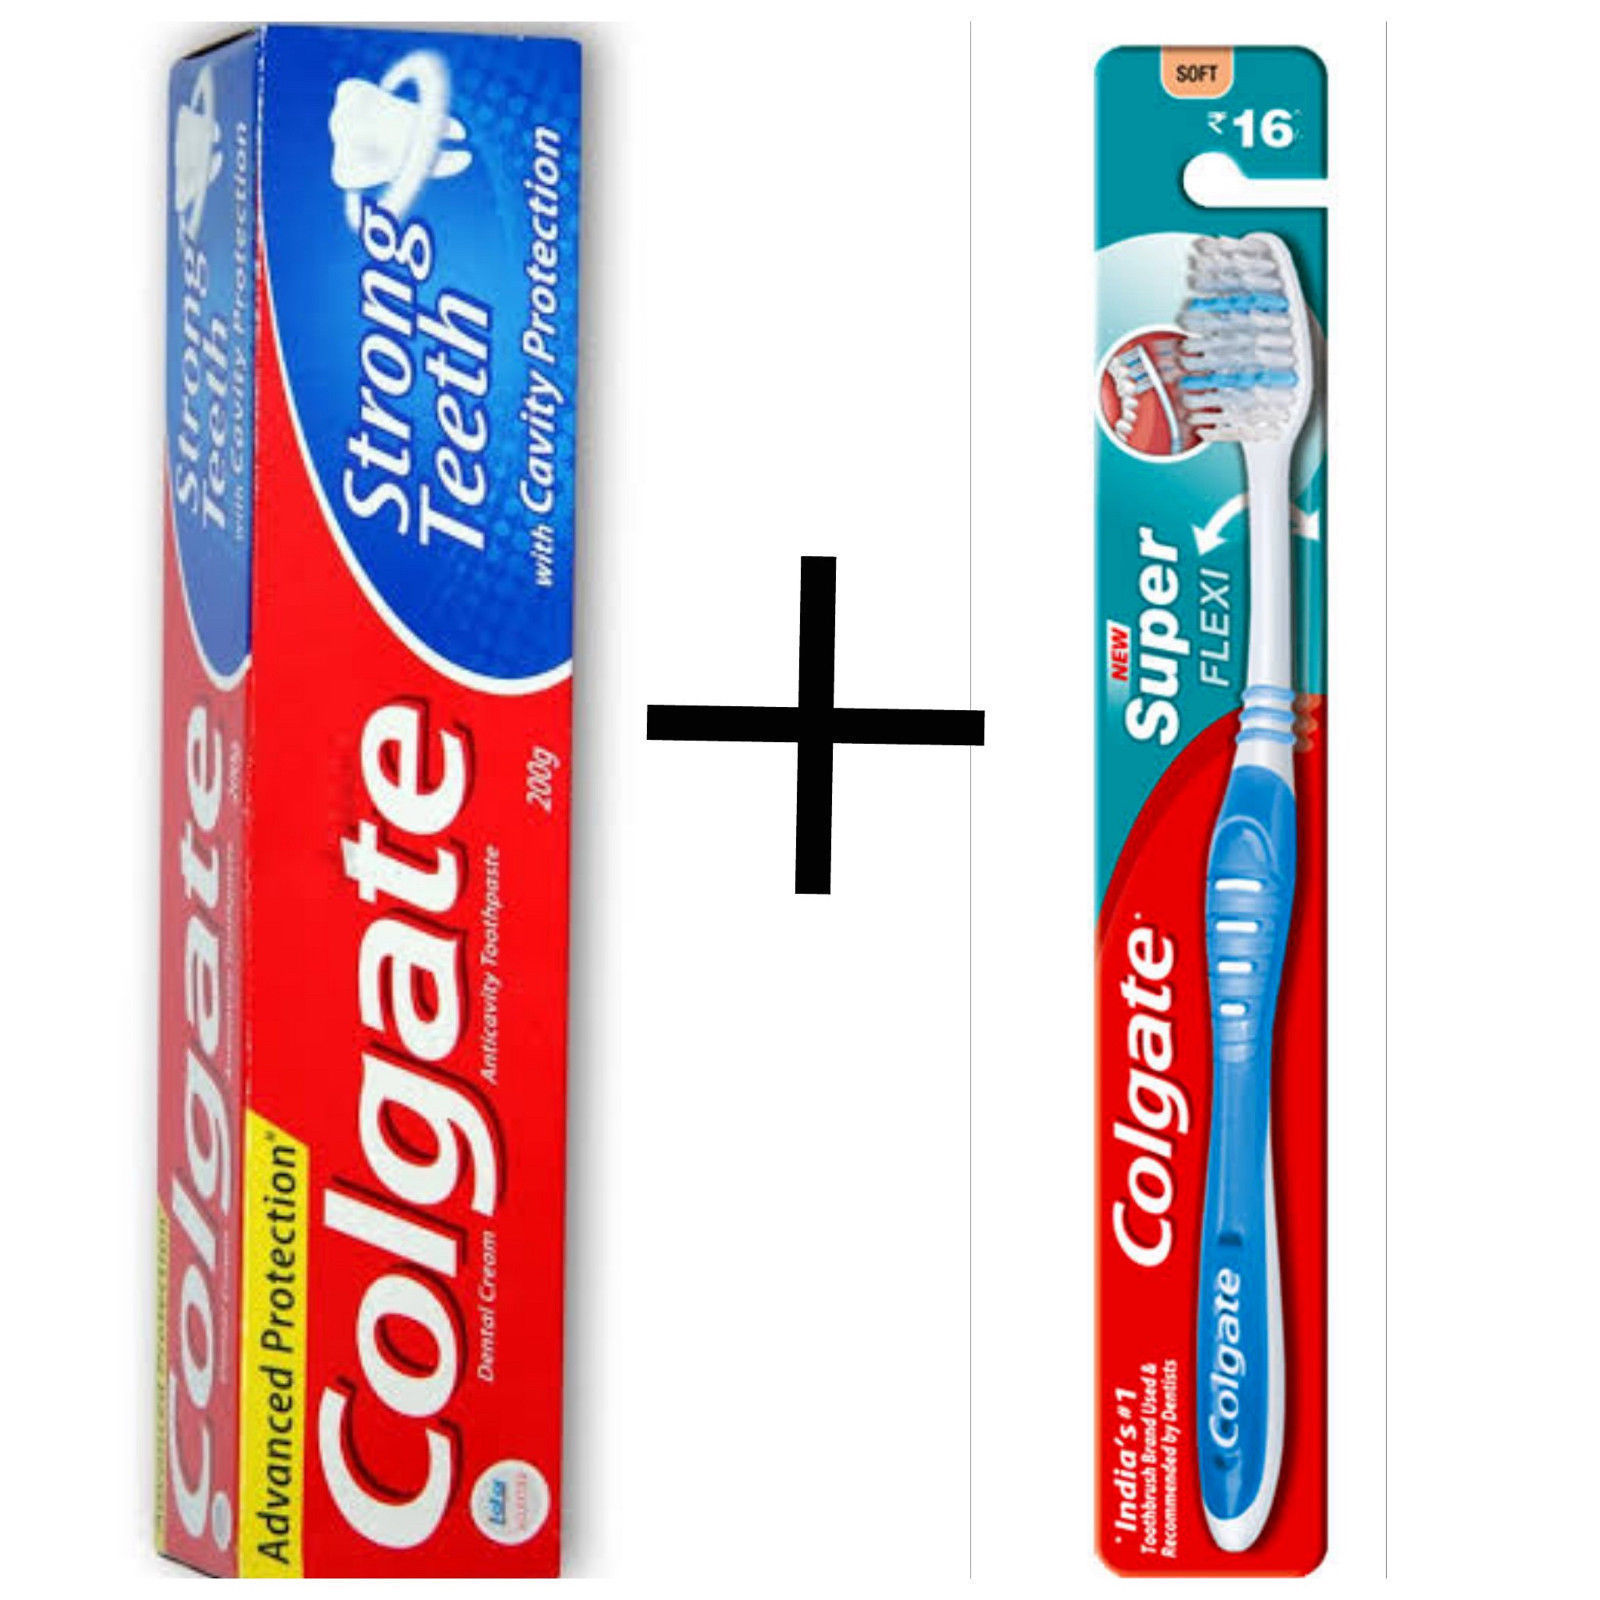 Colgate Strong Teeth Toothpaste + Colgate Super Felxi Tooth Brush In Combo FS - $13.78